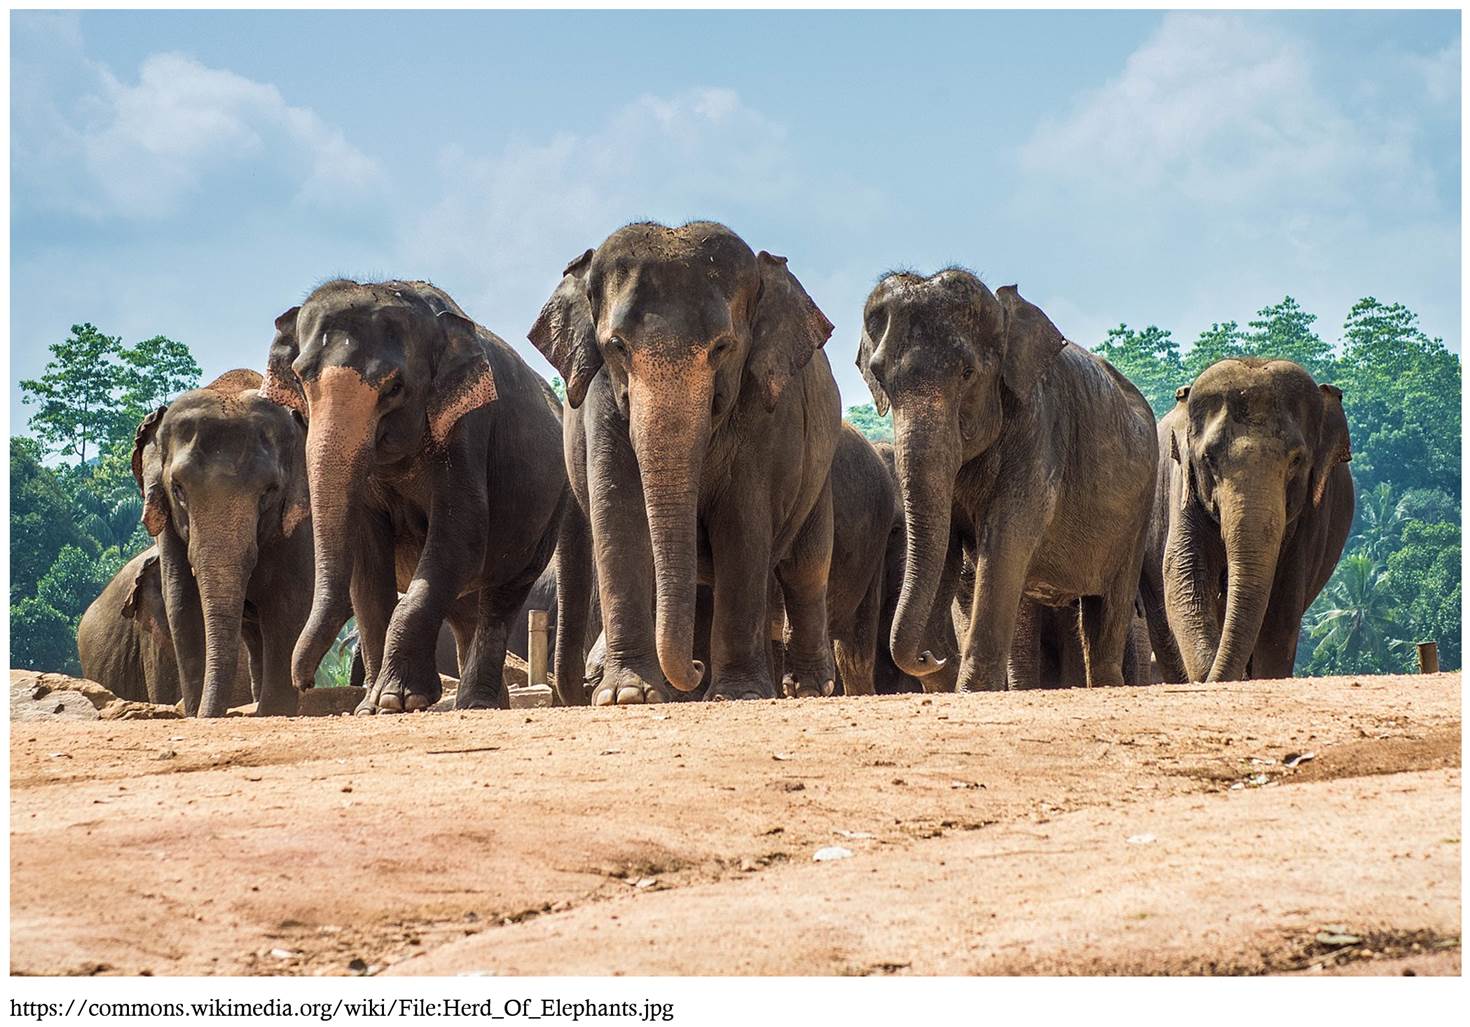 A herd of elephants walking on a dirt road

Description automatically generated with medium confidence